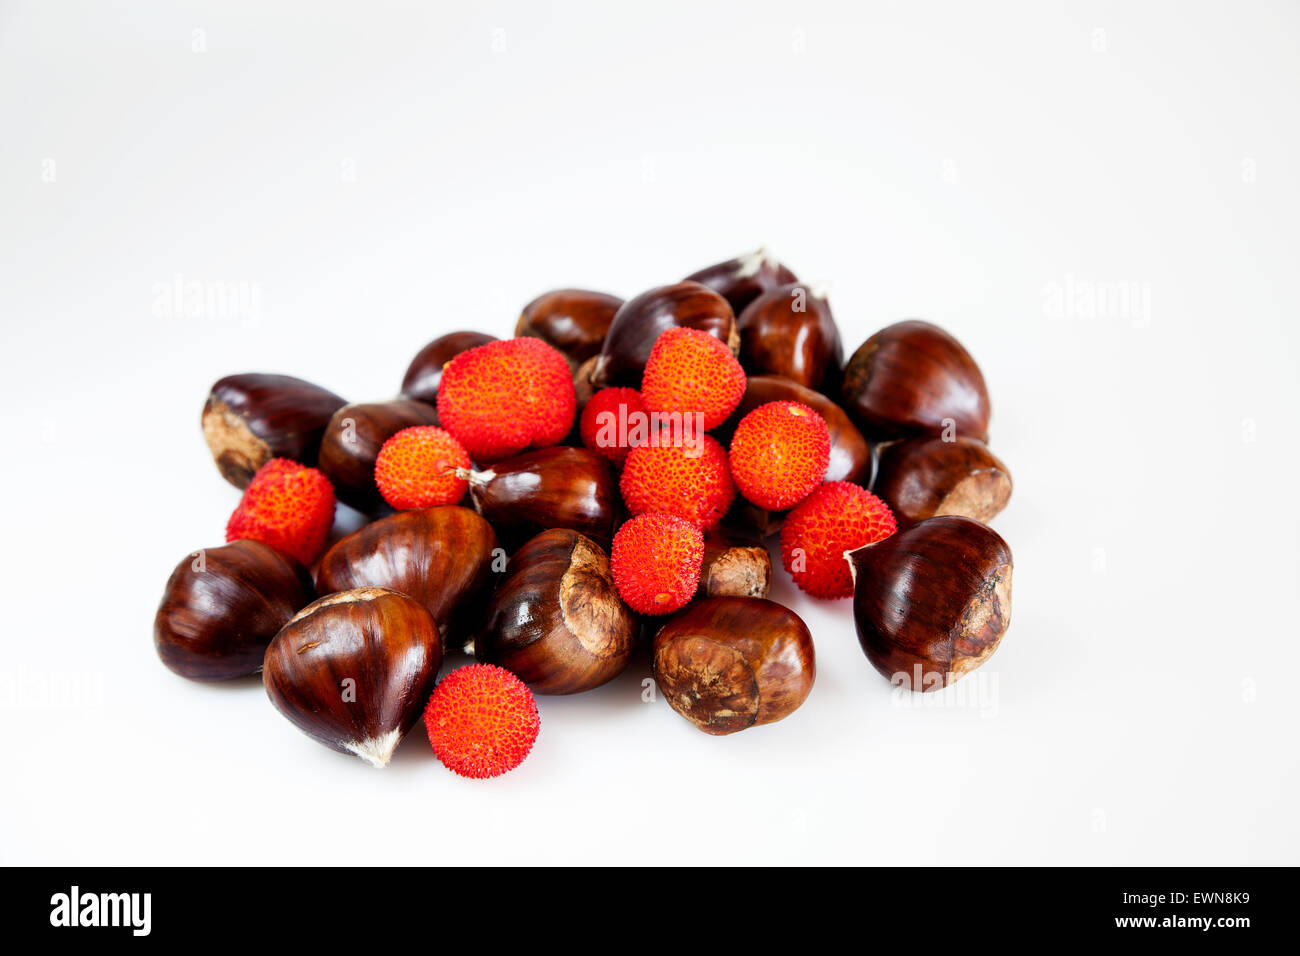 Red Autumn fruits and chestnuts, Stock Photo